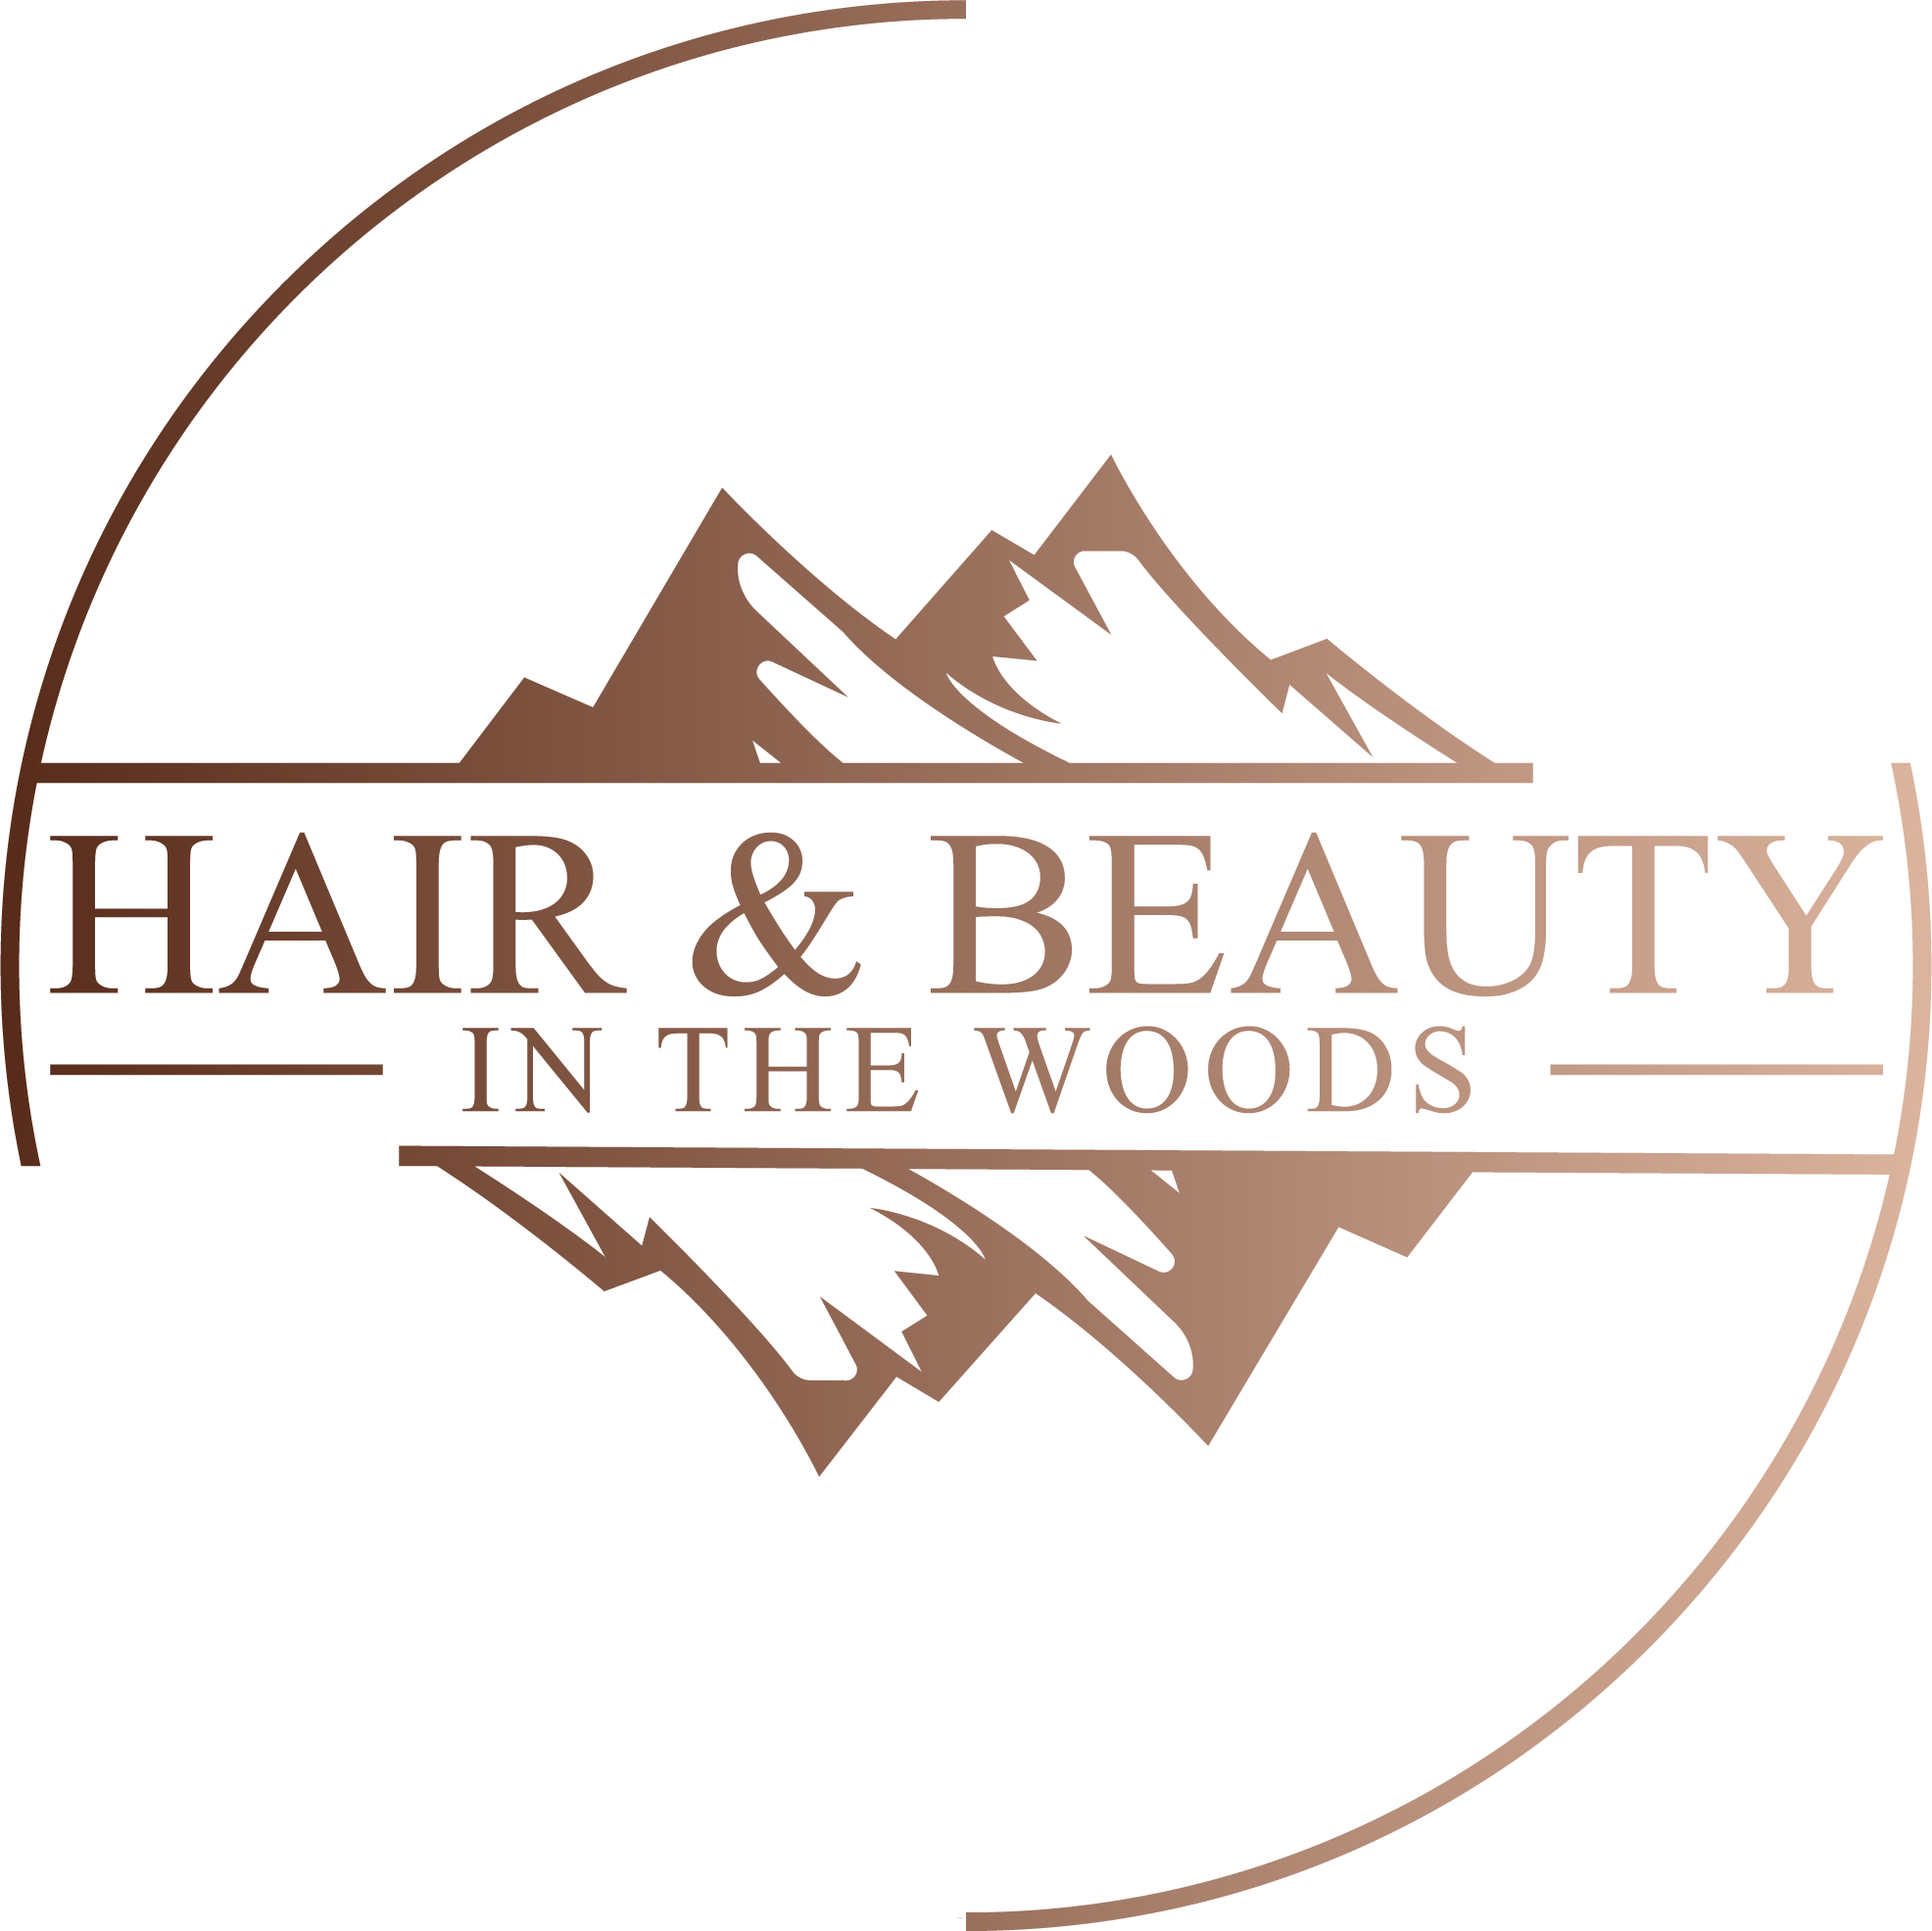 Hair & Beauty In The Woods - Hair and Beauty Services - Logo